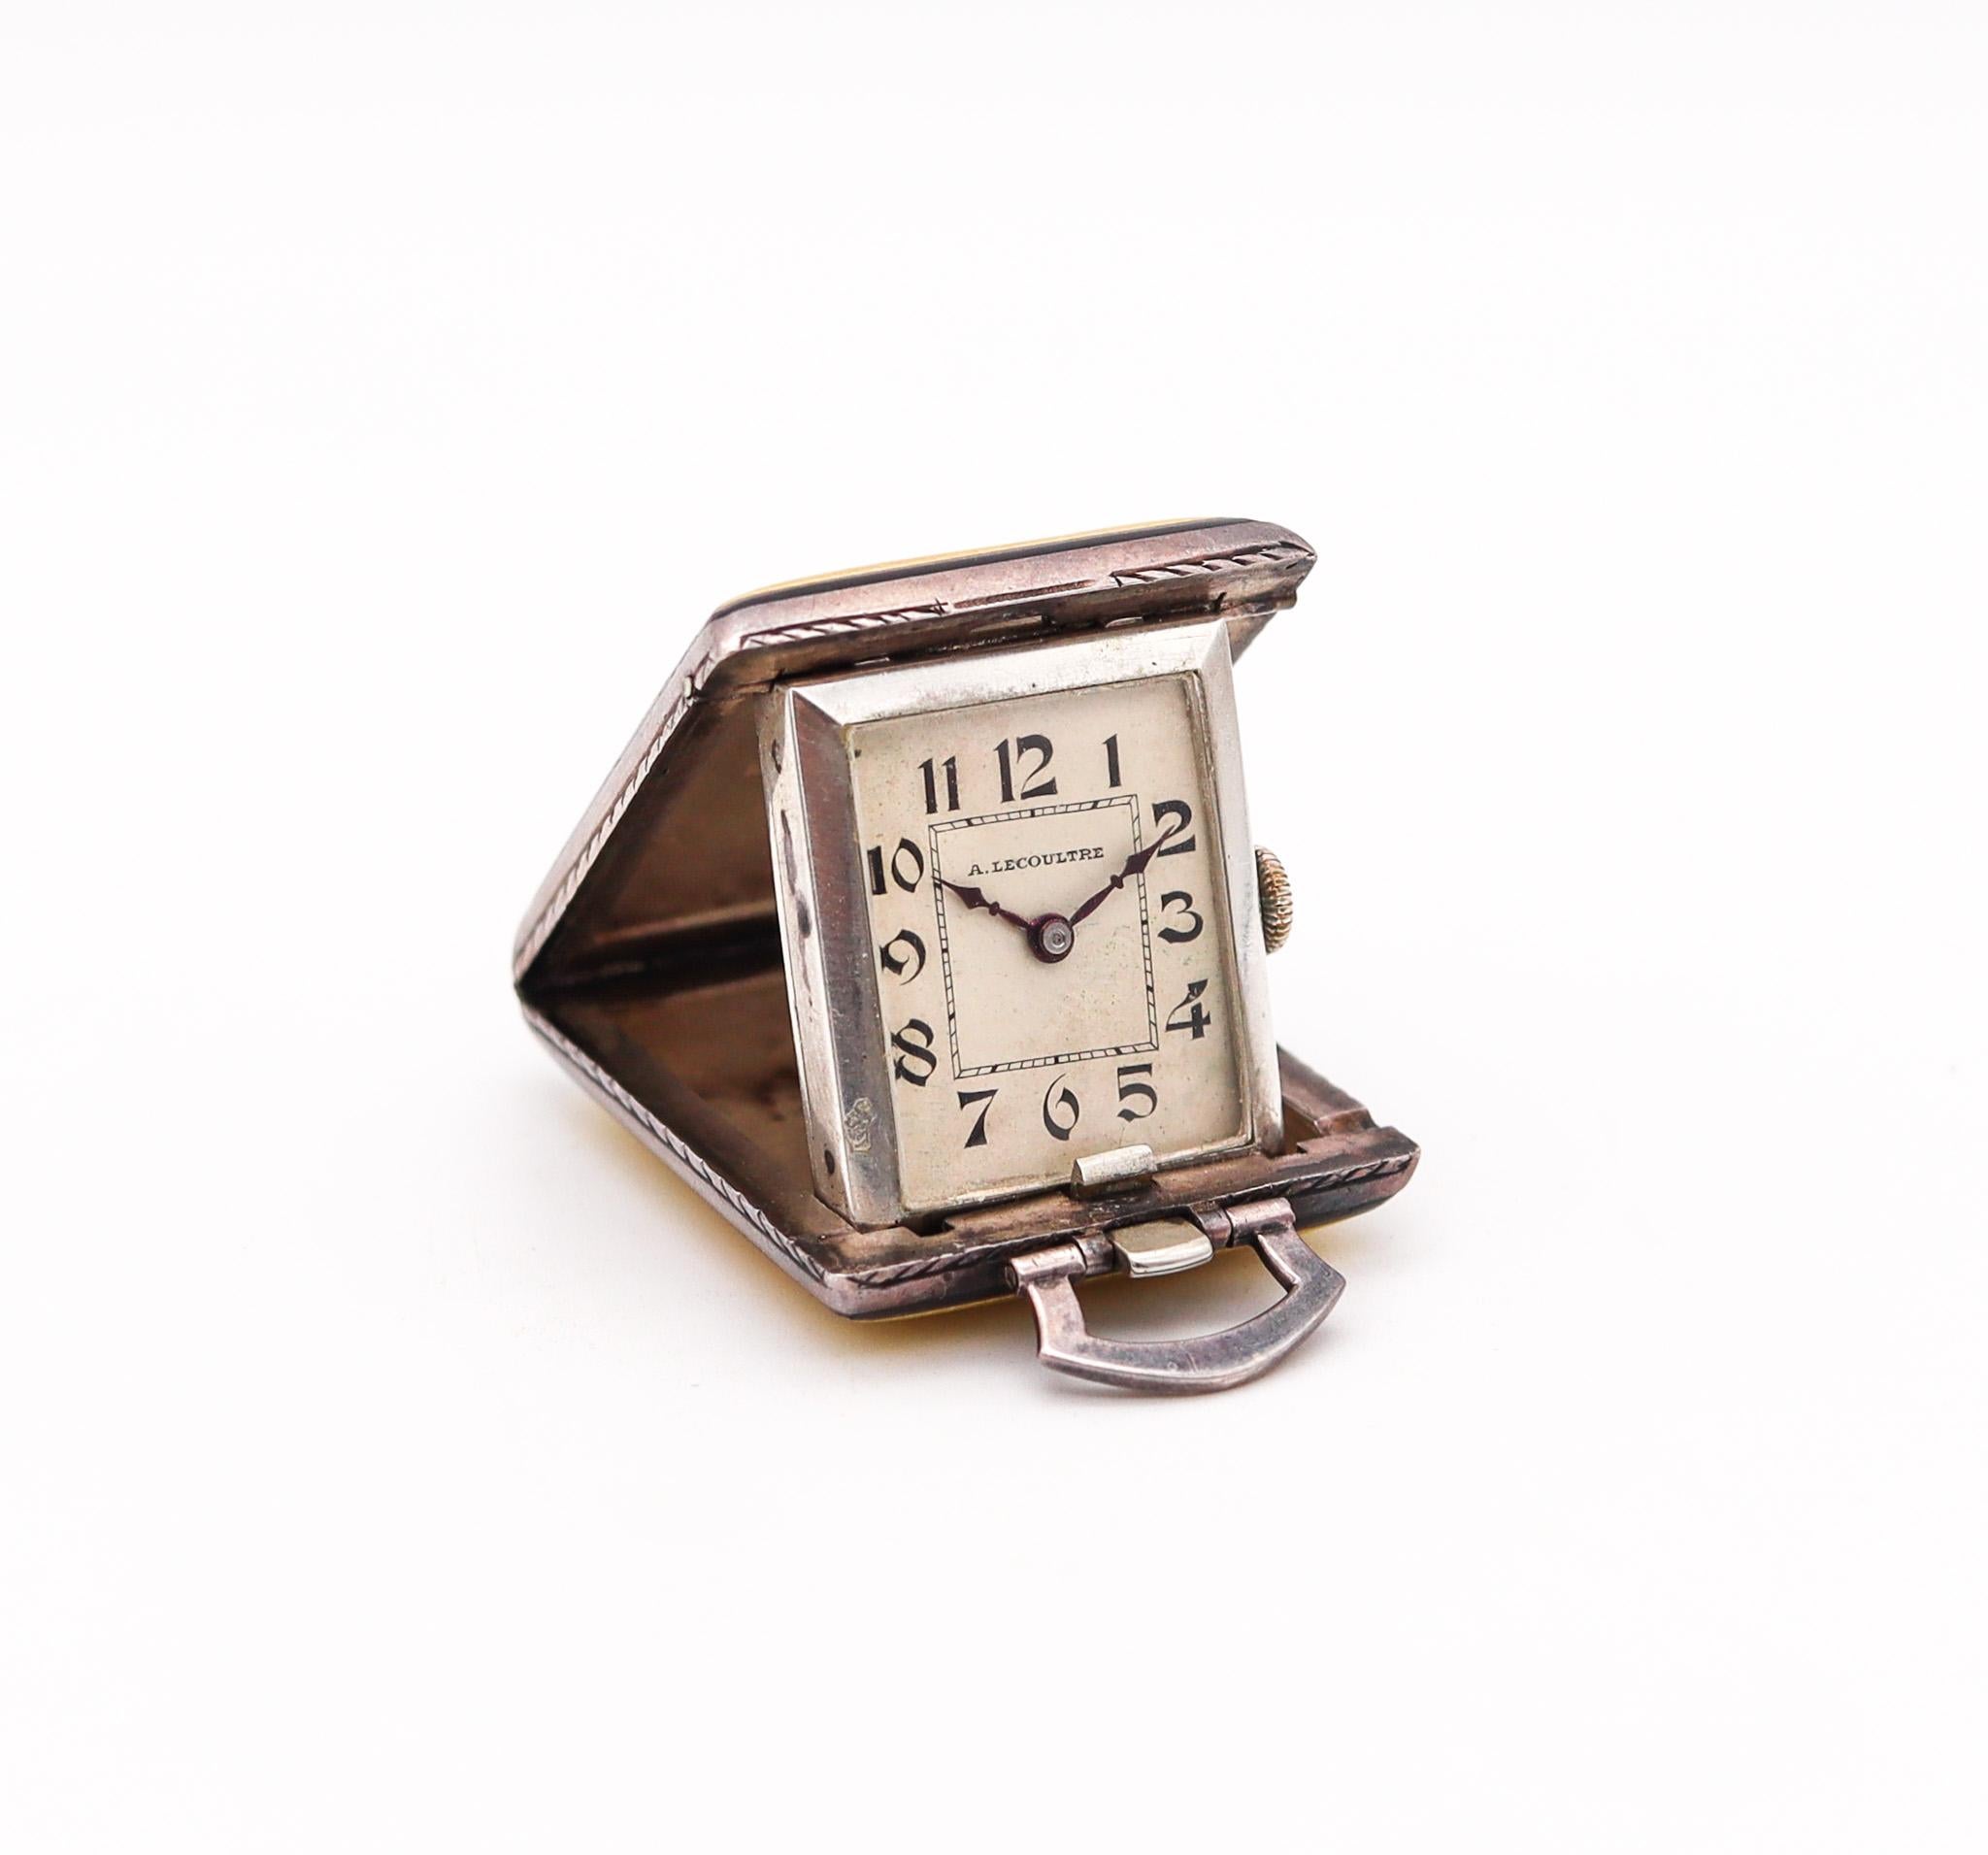 Travel and pendant clock designed by Antoine LeCoultre.

Beautiful foldable travel clock, manufactured in Switzerland by the company of Antoine LeCoultre back in the 1920. This exceptional clock can be fully displayed in a table or wear in a chain